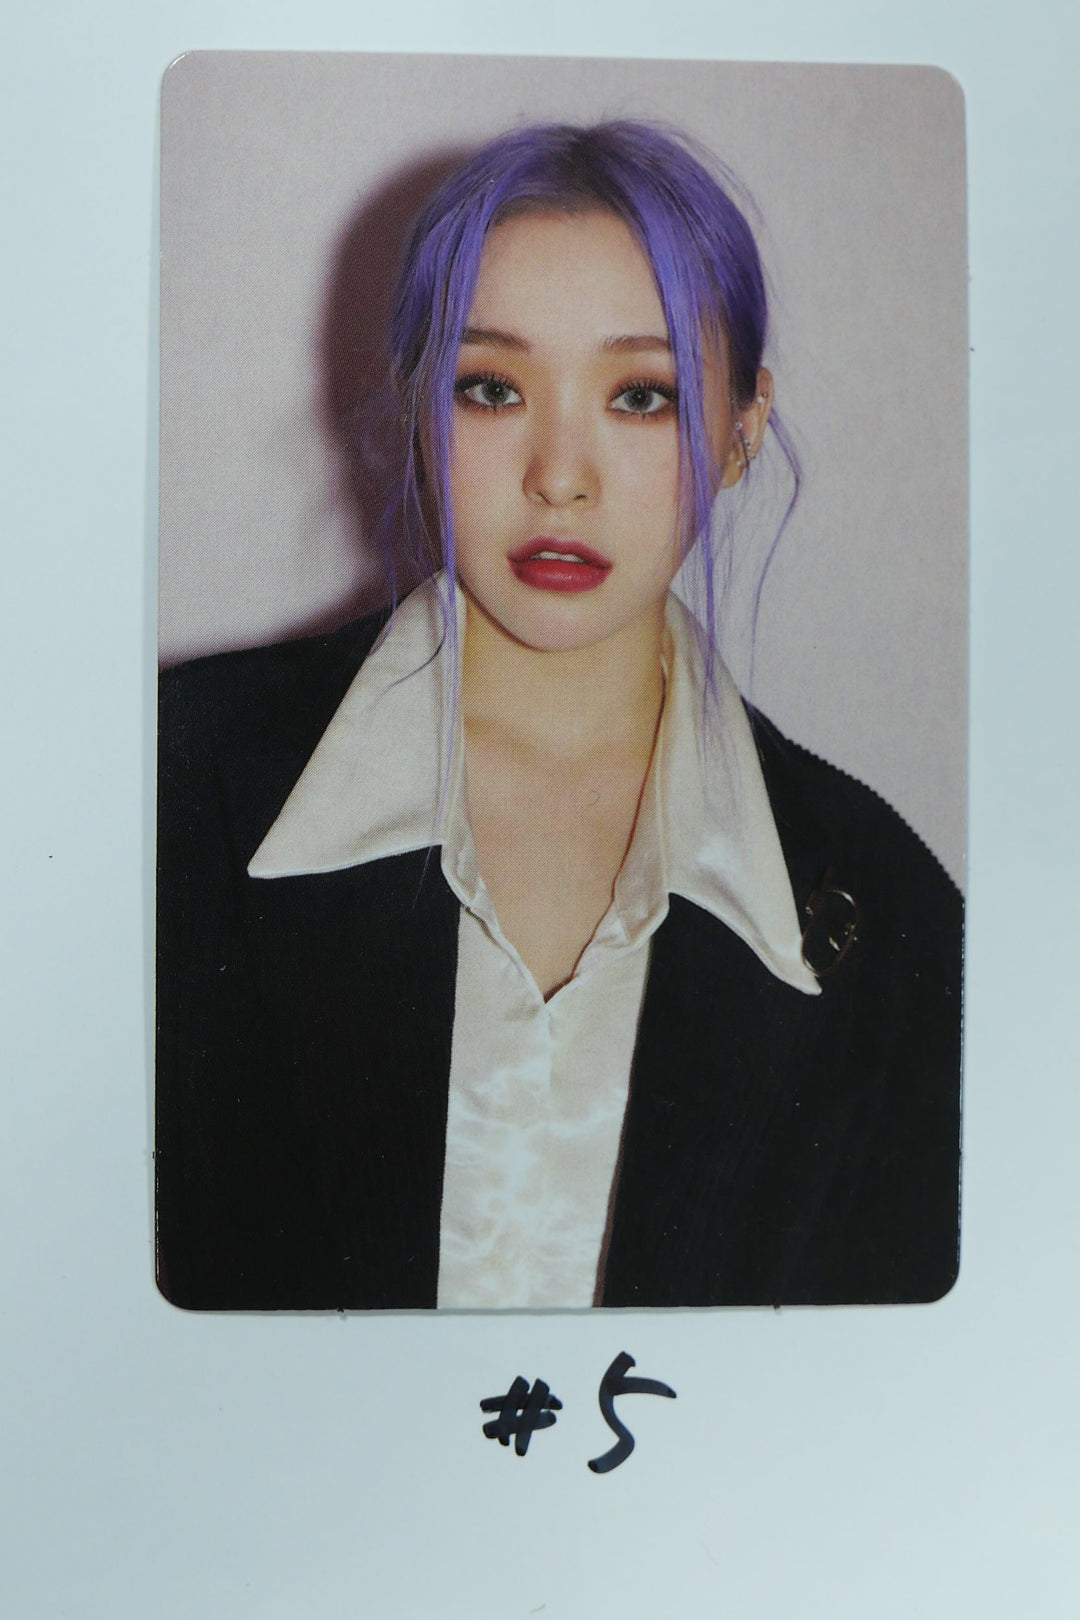 Dreamcatcher "Road To Utopia" - Gahyeon Official Photocard